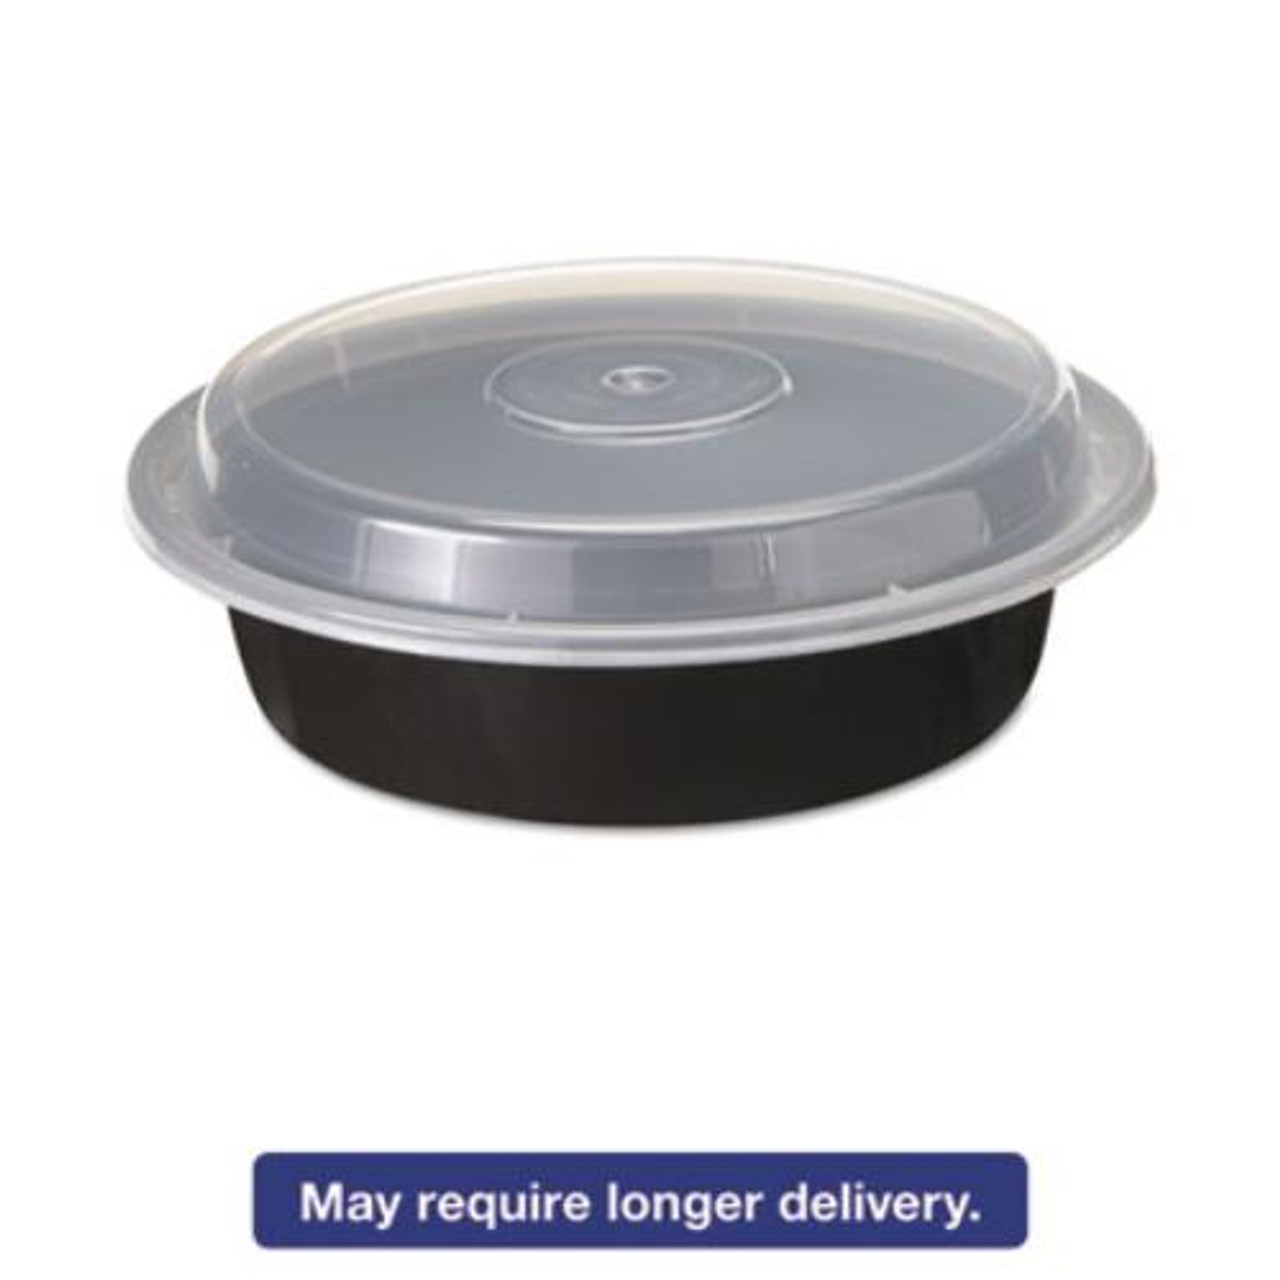 Collapsible containers for Efficient Fleet Management ✓